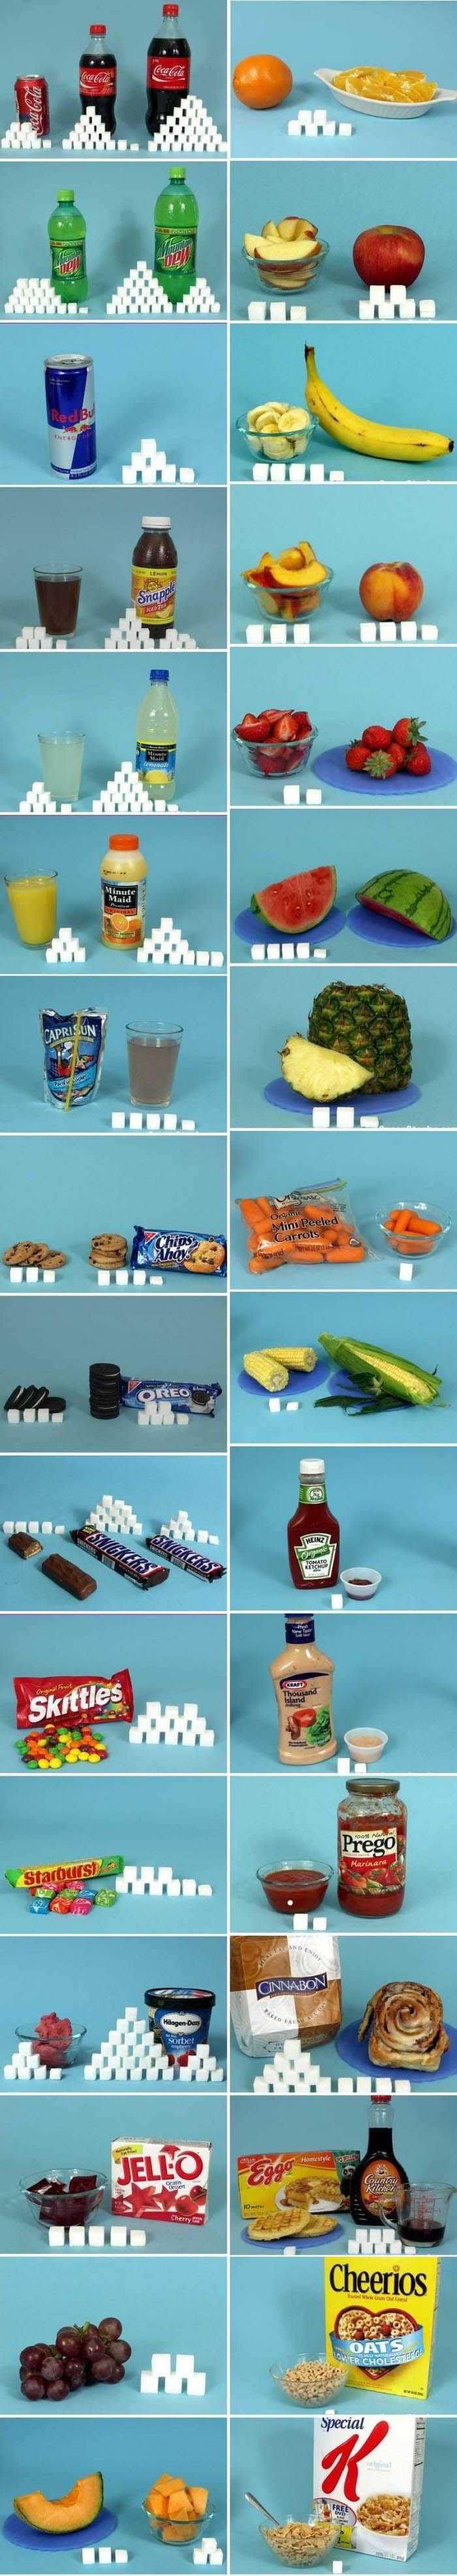 How much sugar are you consuming?